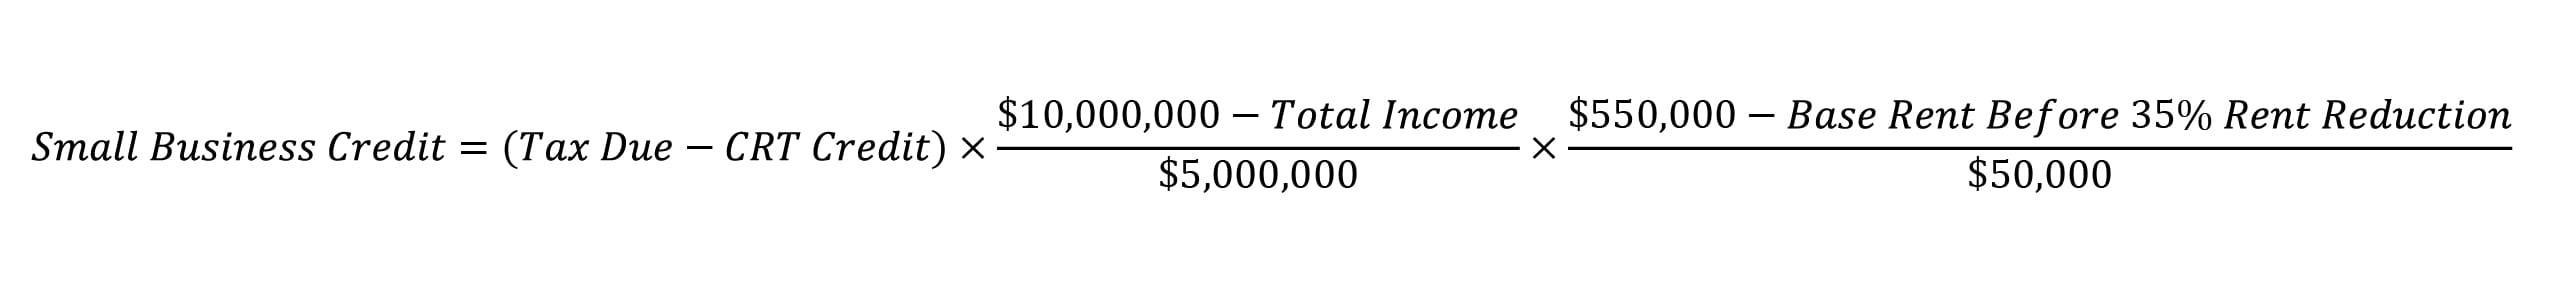 The Small Business Tax Credit is calculated by finding the amounts below the threshold for total income and base rent, then dividing by $5 million and $50,000, respectively; multiplying those amounts; then multiplying the product by the difference between the tax due and the tenant’s CRT credit amount.